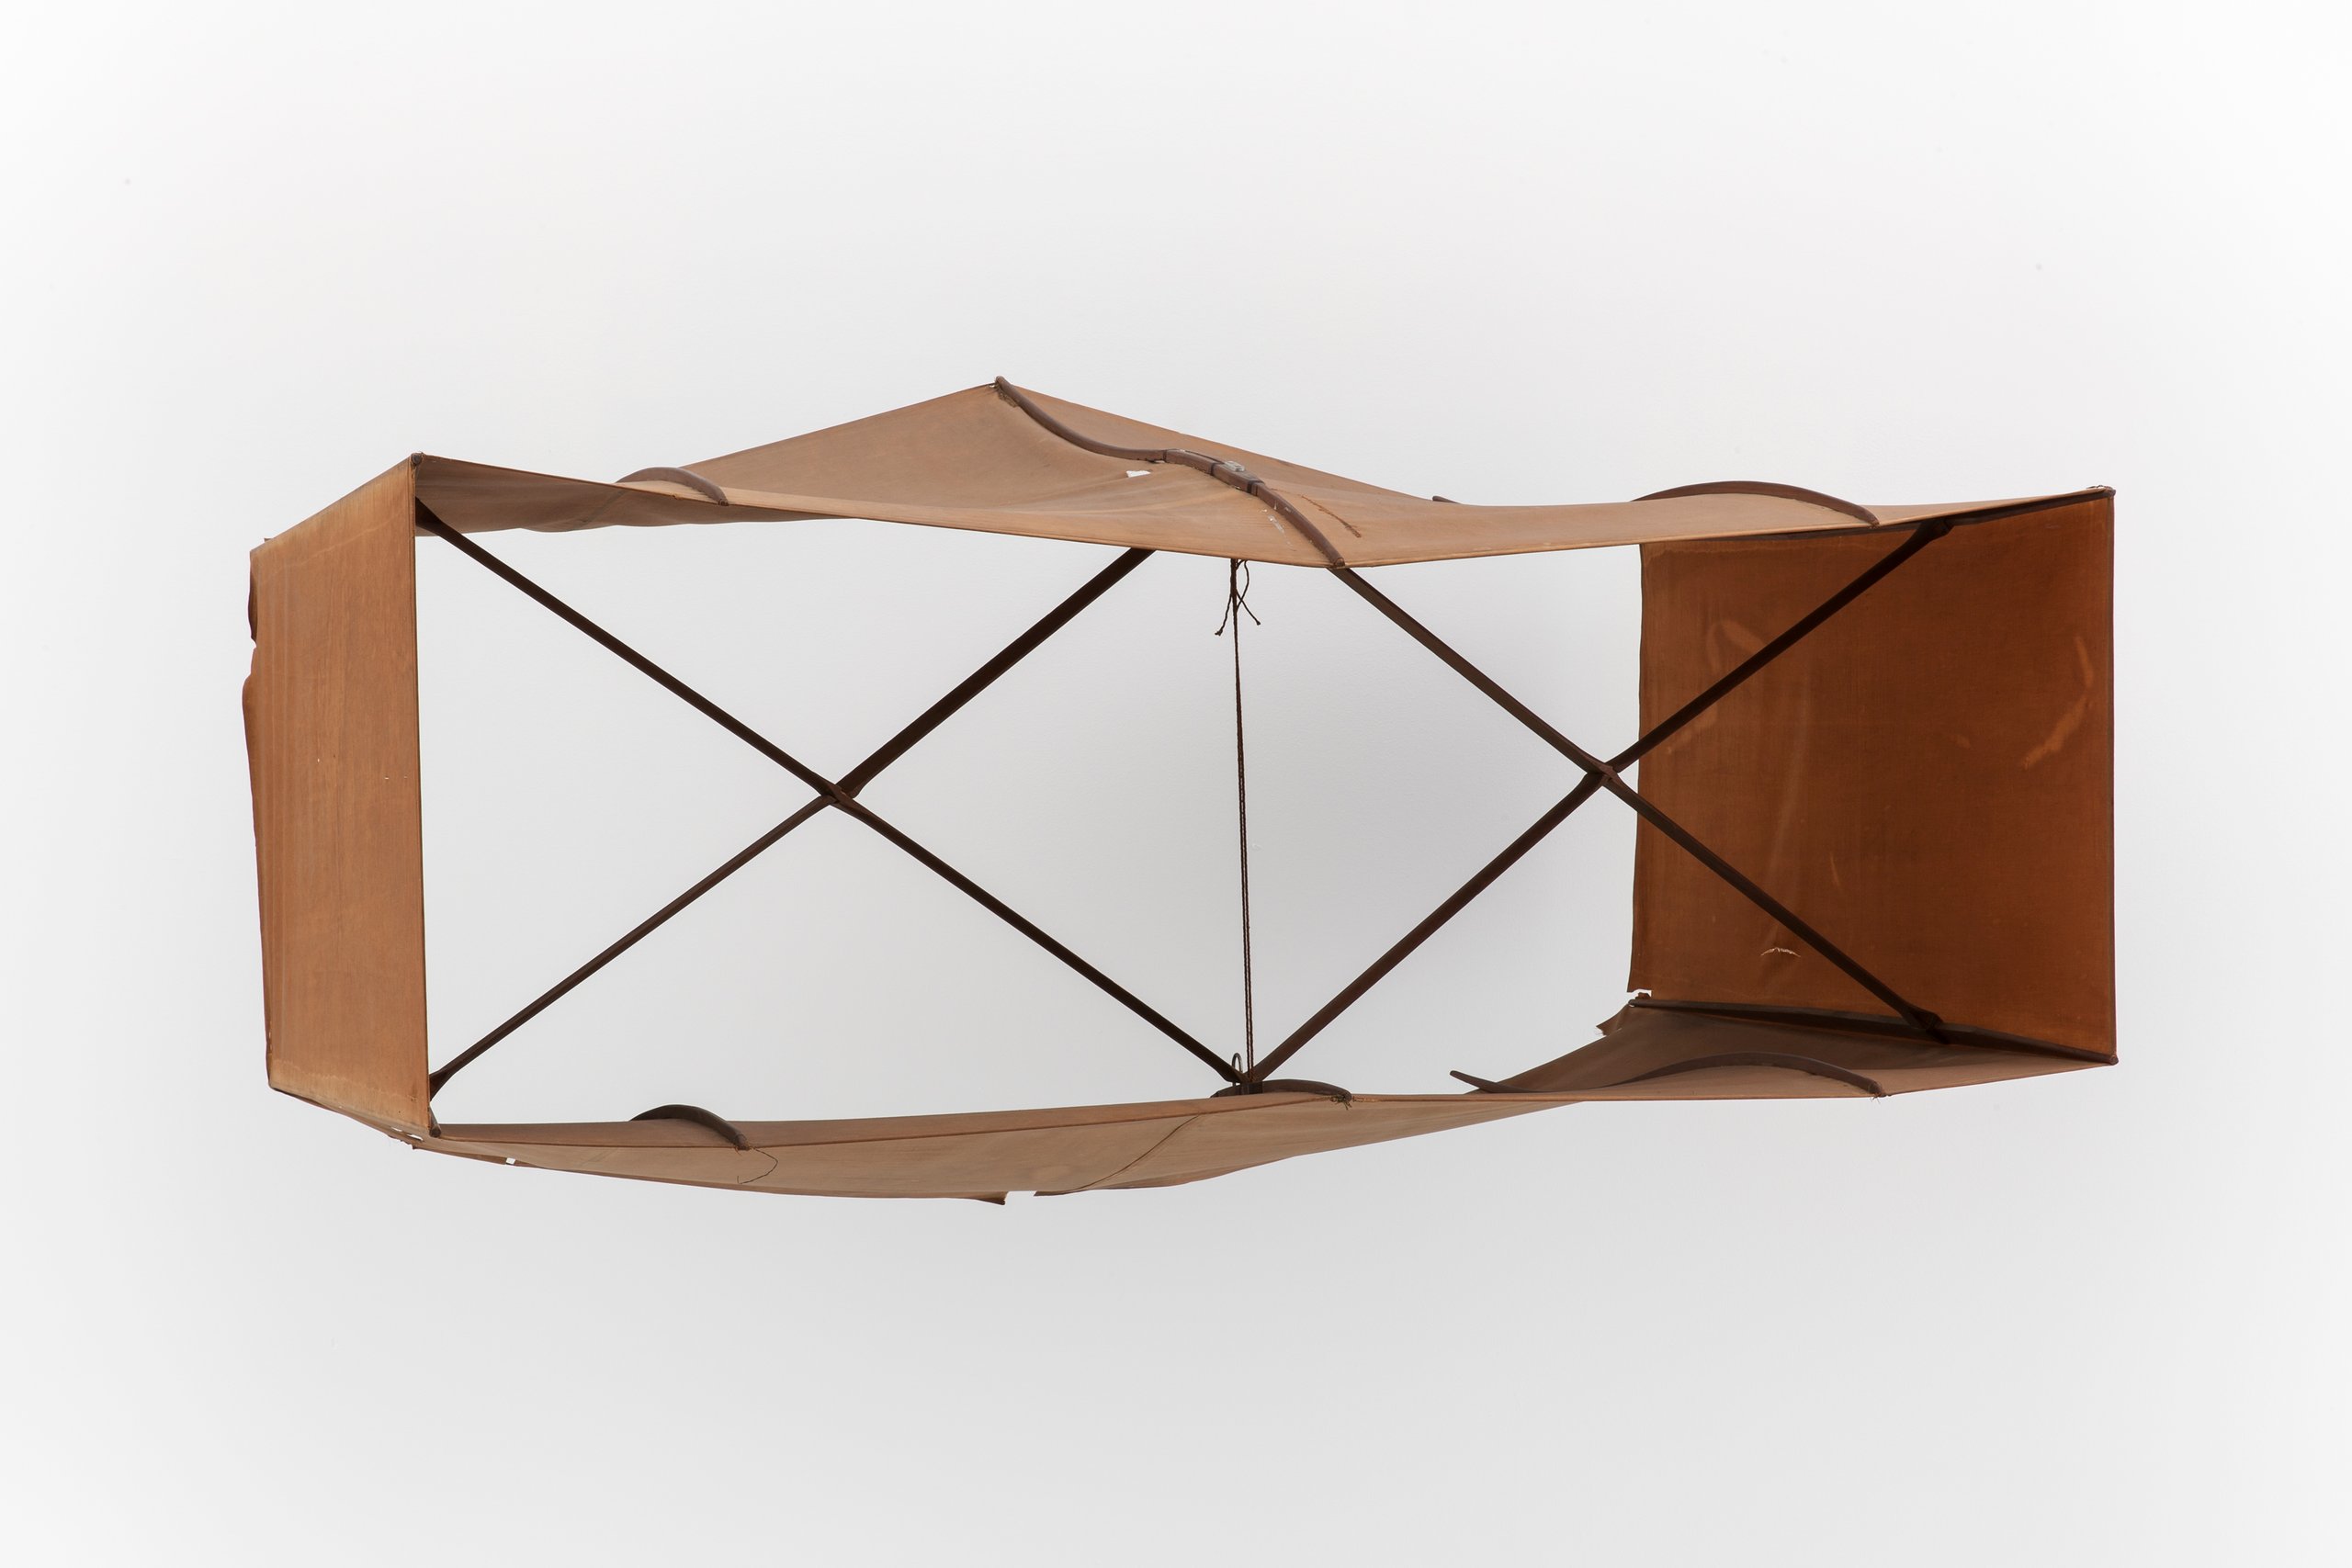 Box kite designed by Lawrence Hargrave